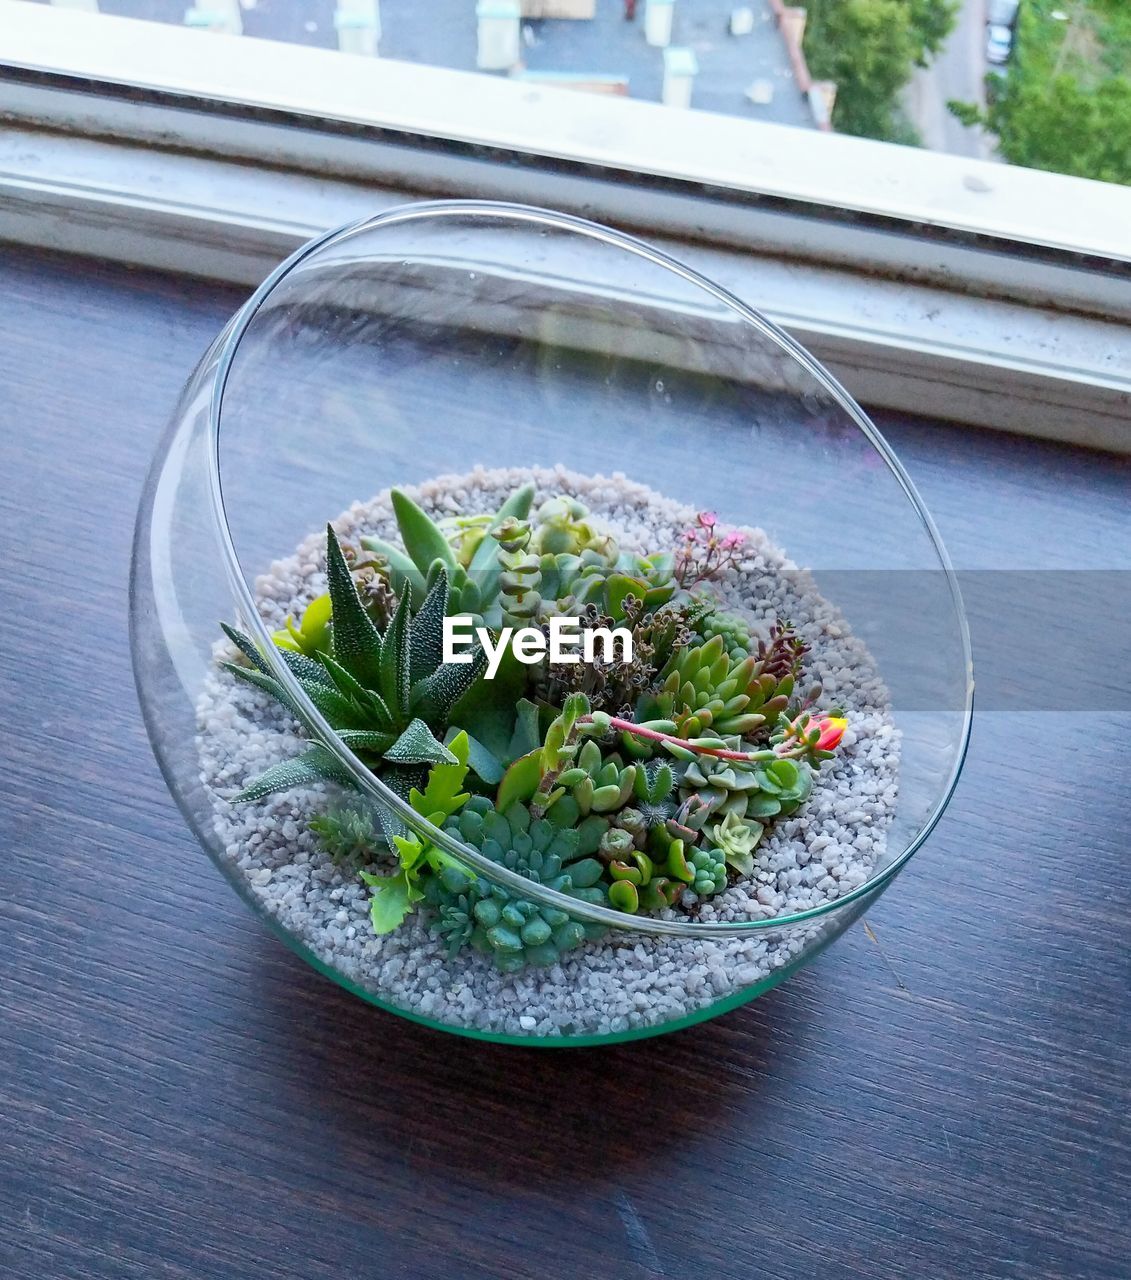 HIGH ANGLE VIEW OF PLANTS IN GLASS BOWL